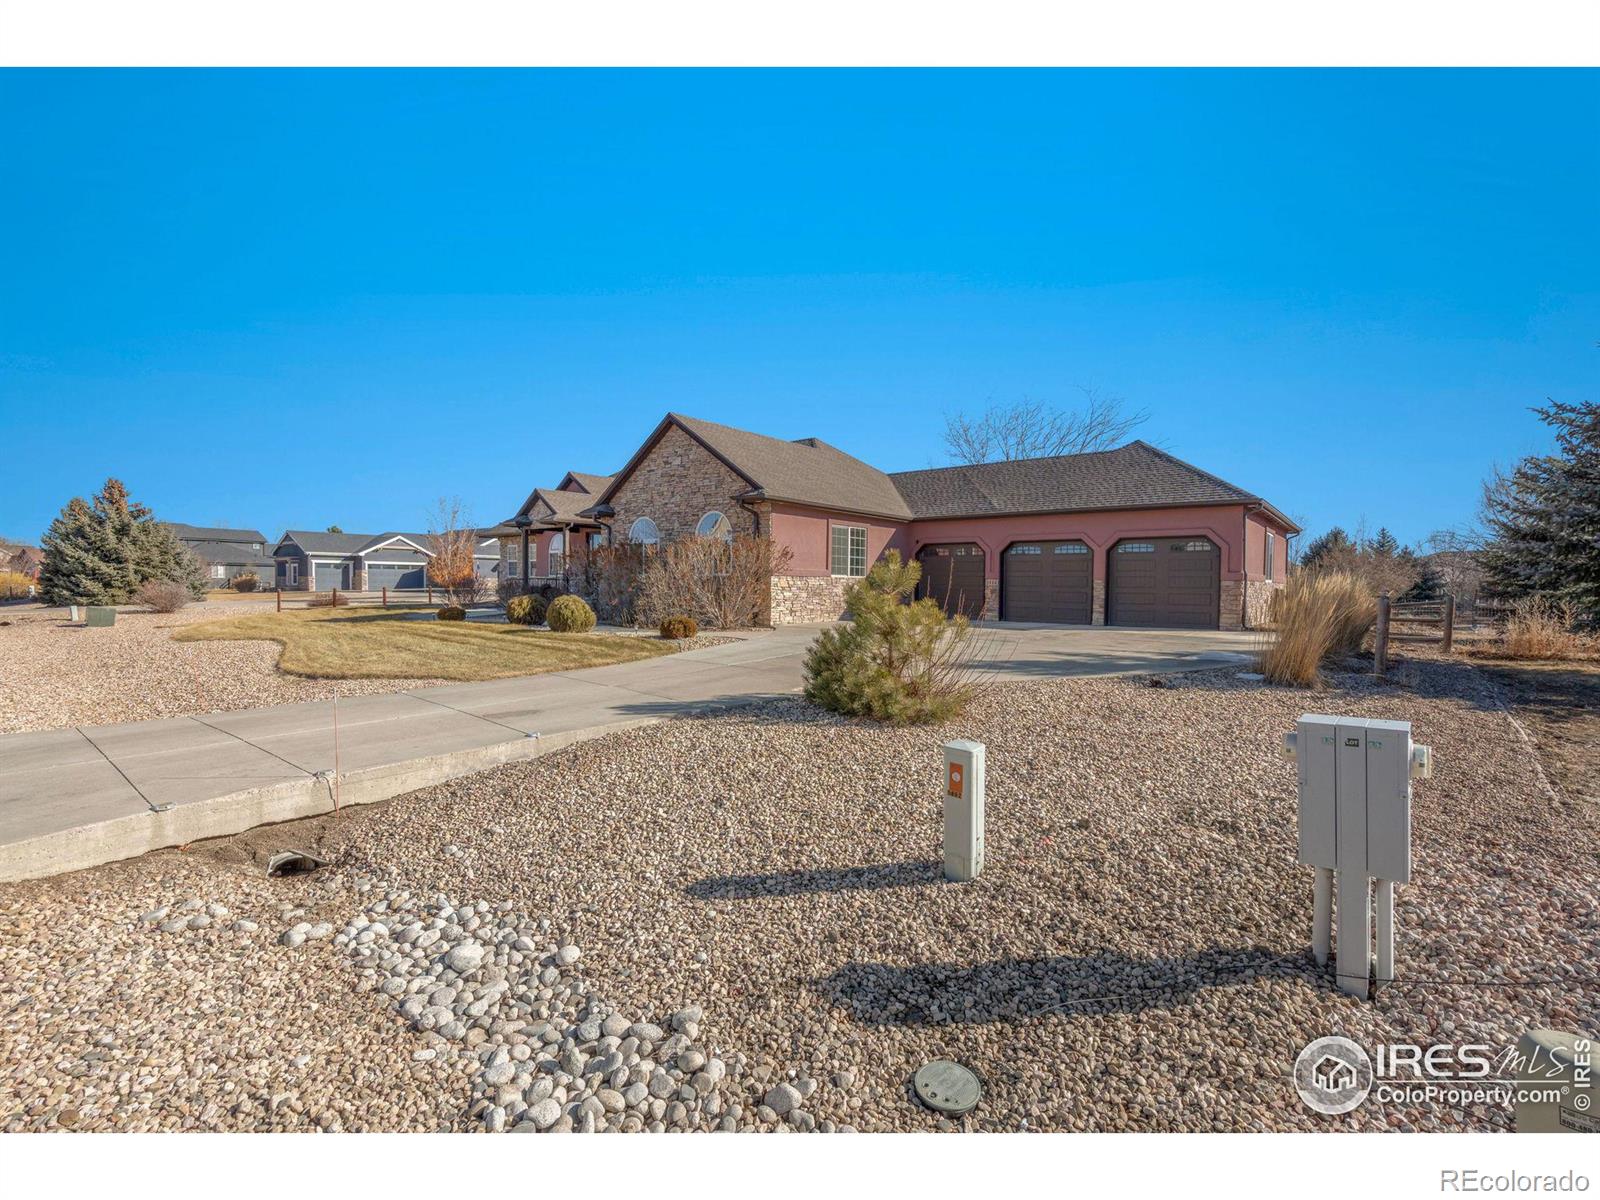 Report Image for 1452  Red Fox Circle,Severance, Colorado